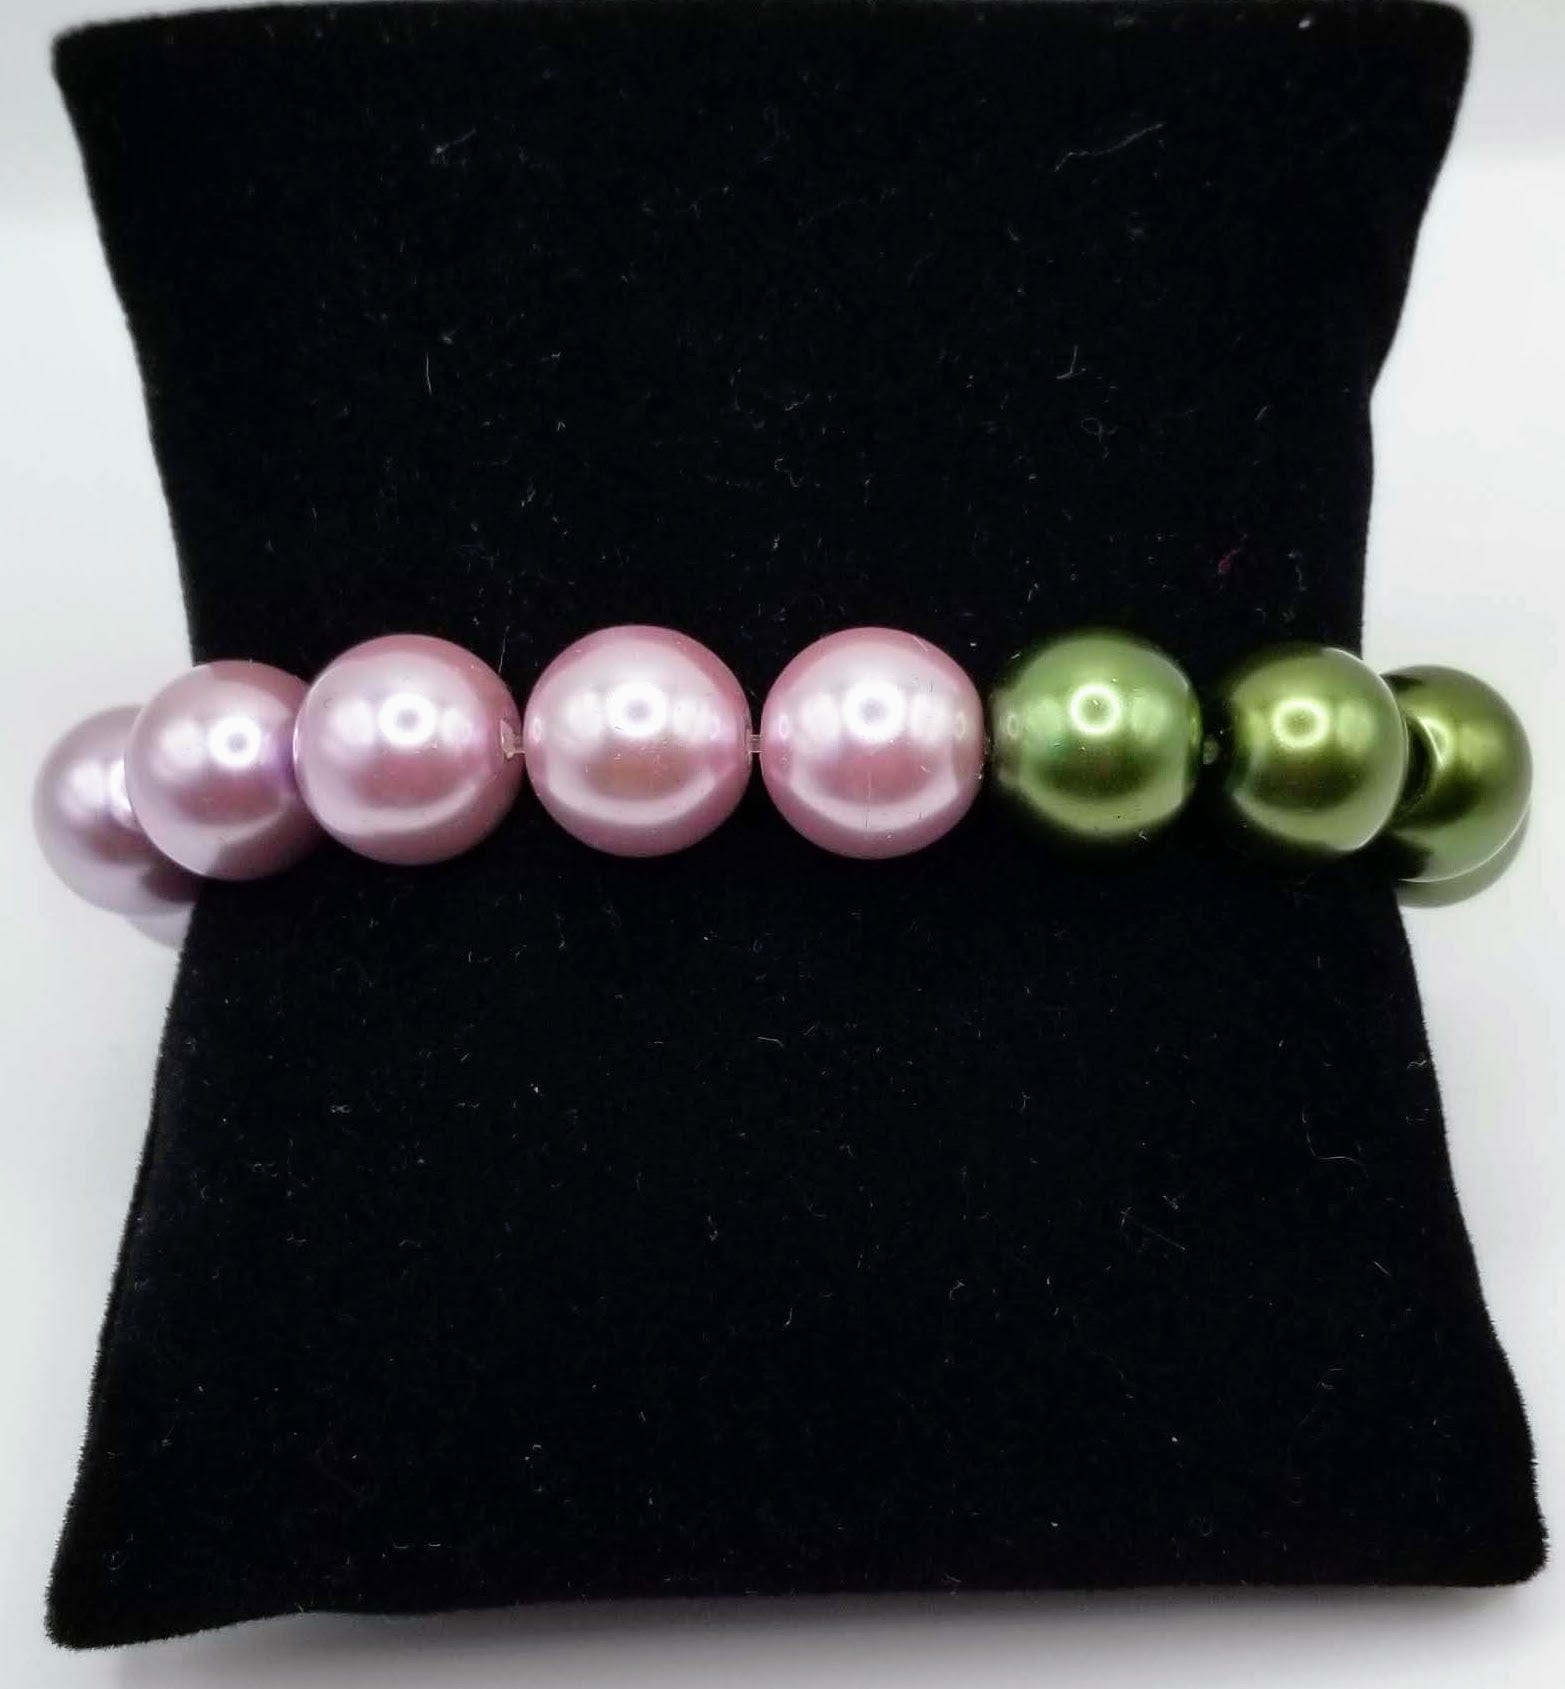 Handcrafted Jewelry By Teri C Beaded Bracelet Pink And Green Pearl Beads With Matching Earrings